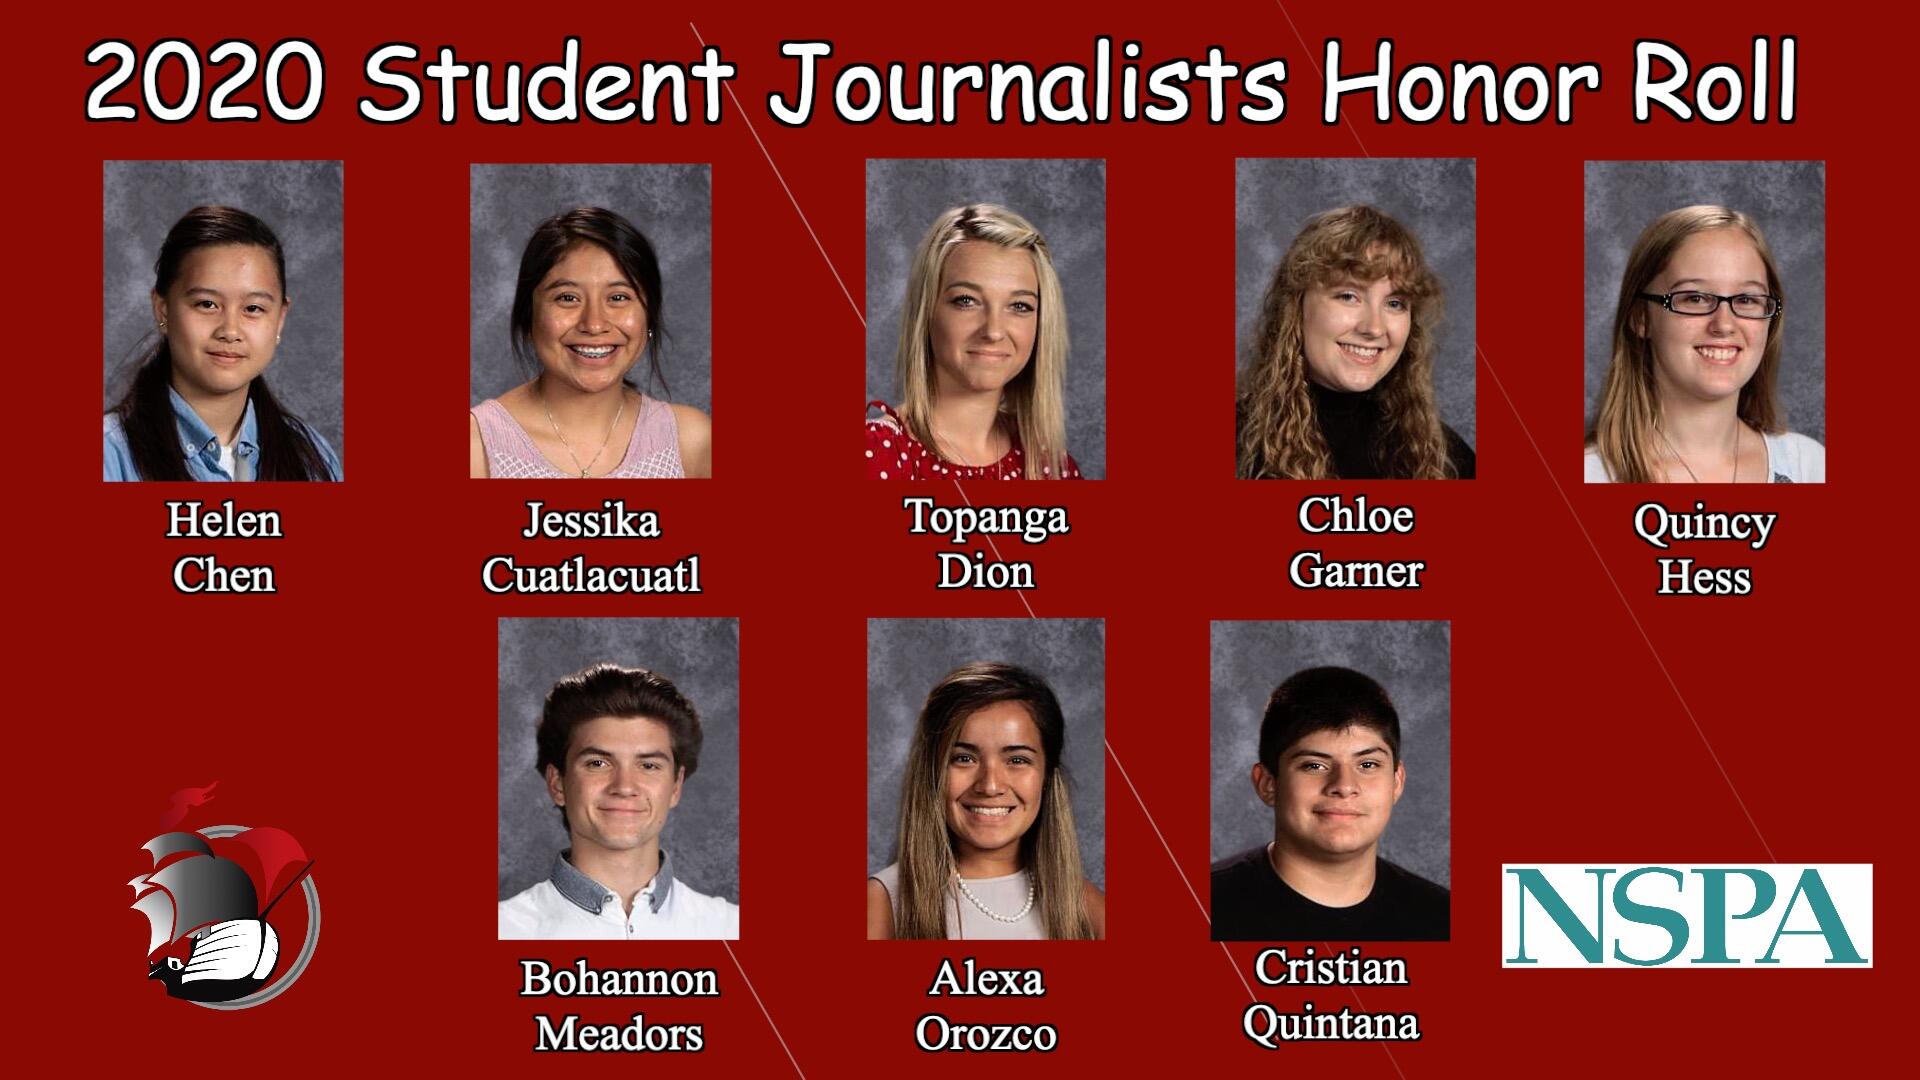 2020 Student Journalists Honor Roll-photos of students with PHS ship logo and NSPA Logo